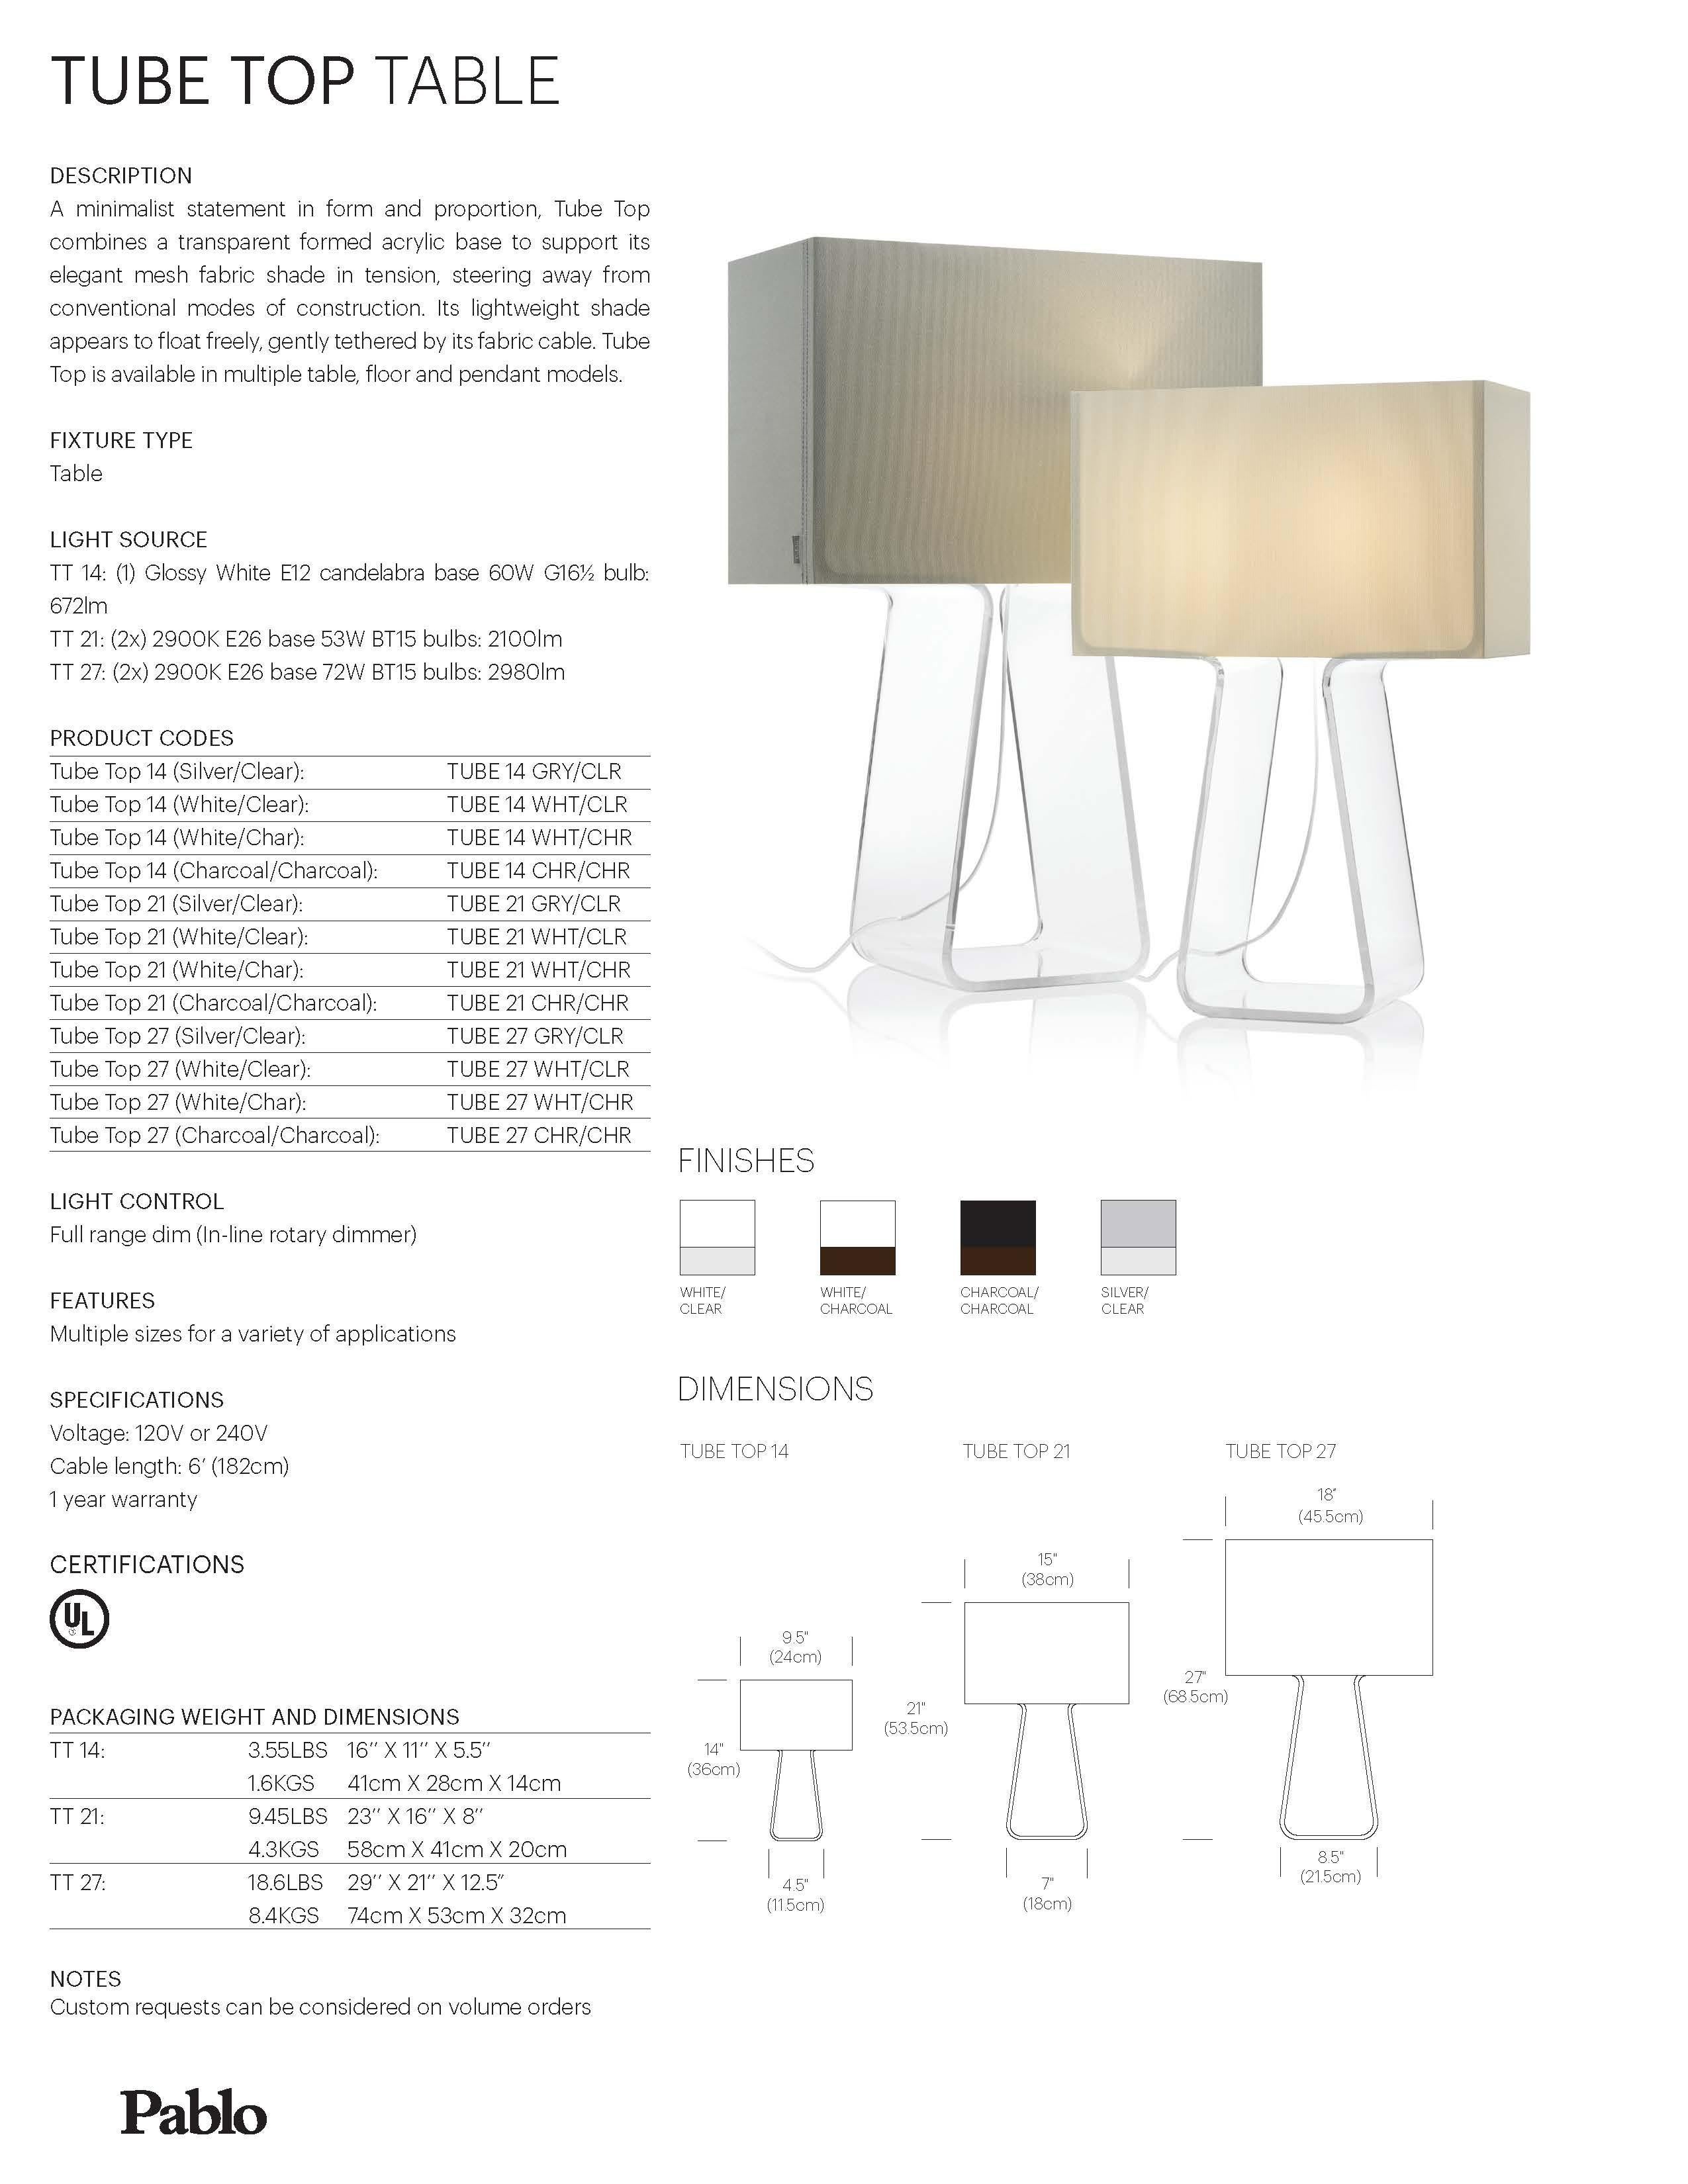 Contemporary Tubetop 14 Table Lamp in White and Clear by Pablo Designs For Sale